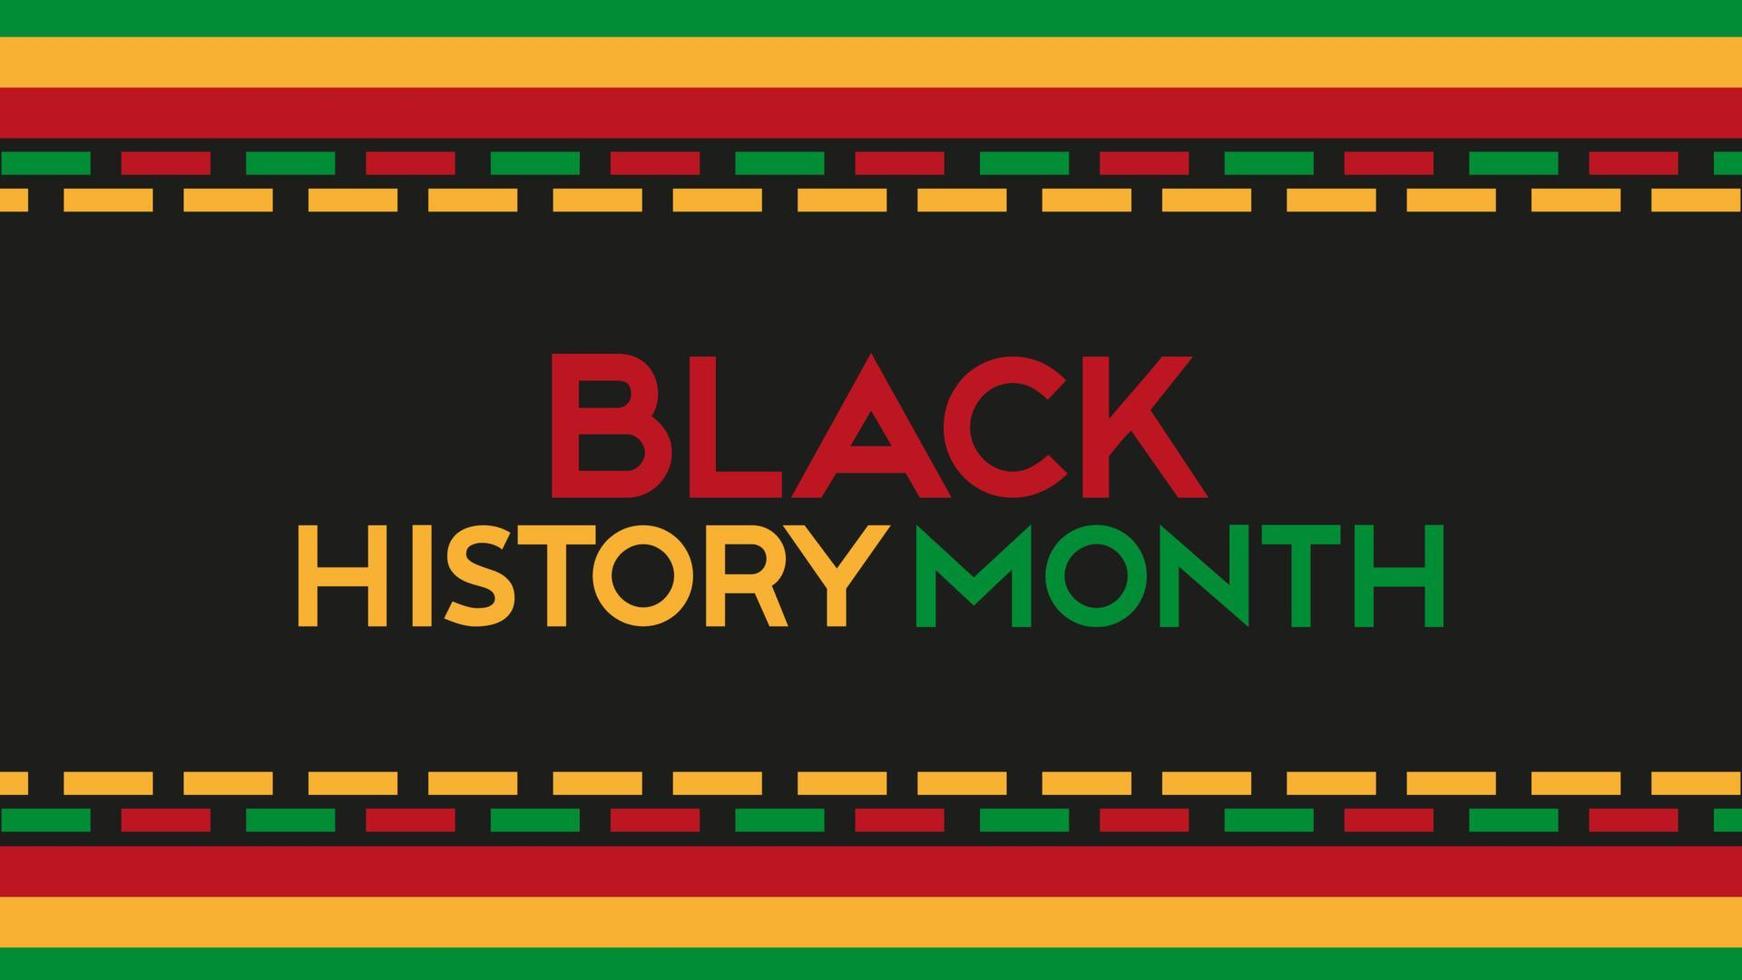 Black history month vector